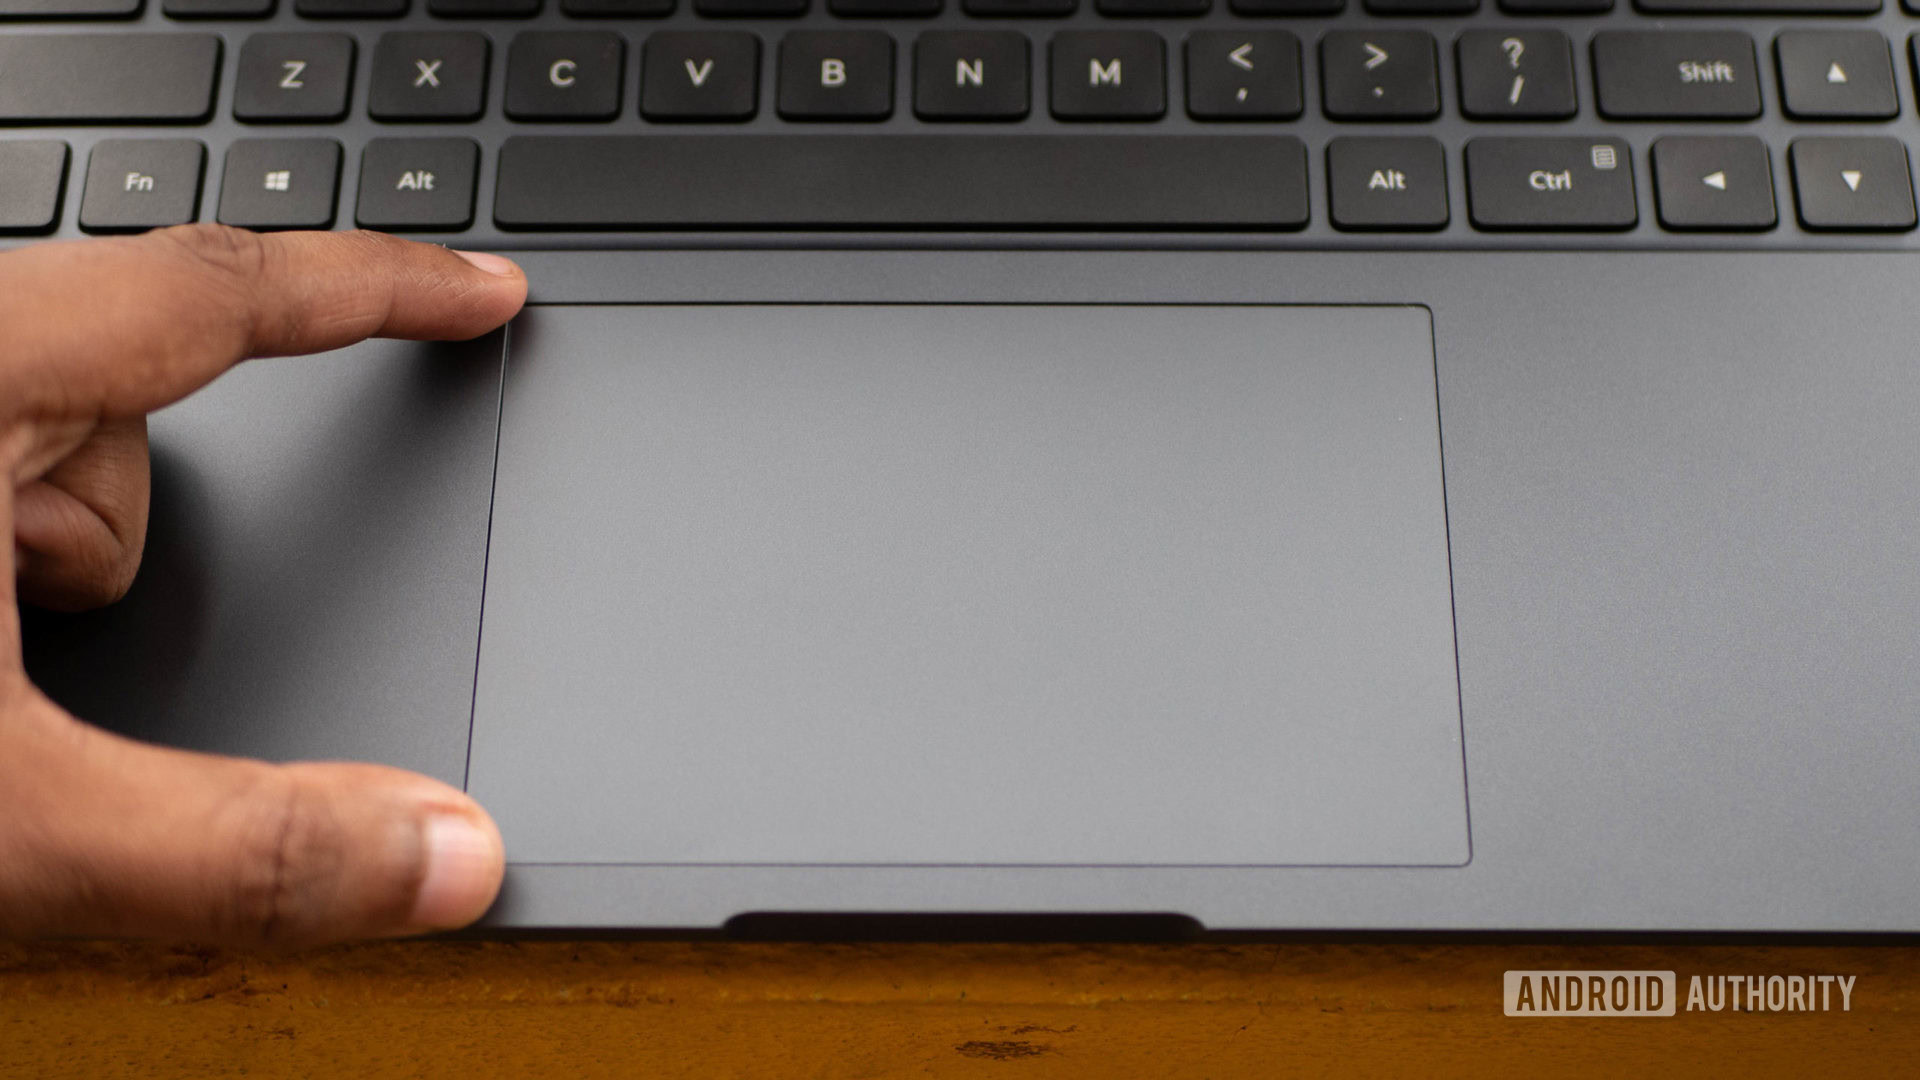 RedmiBook Pro touchpad